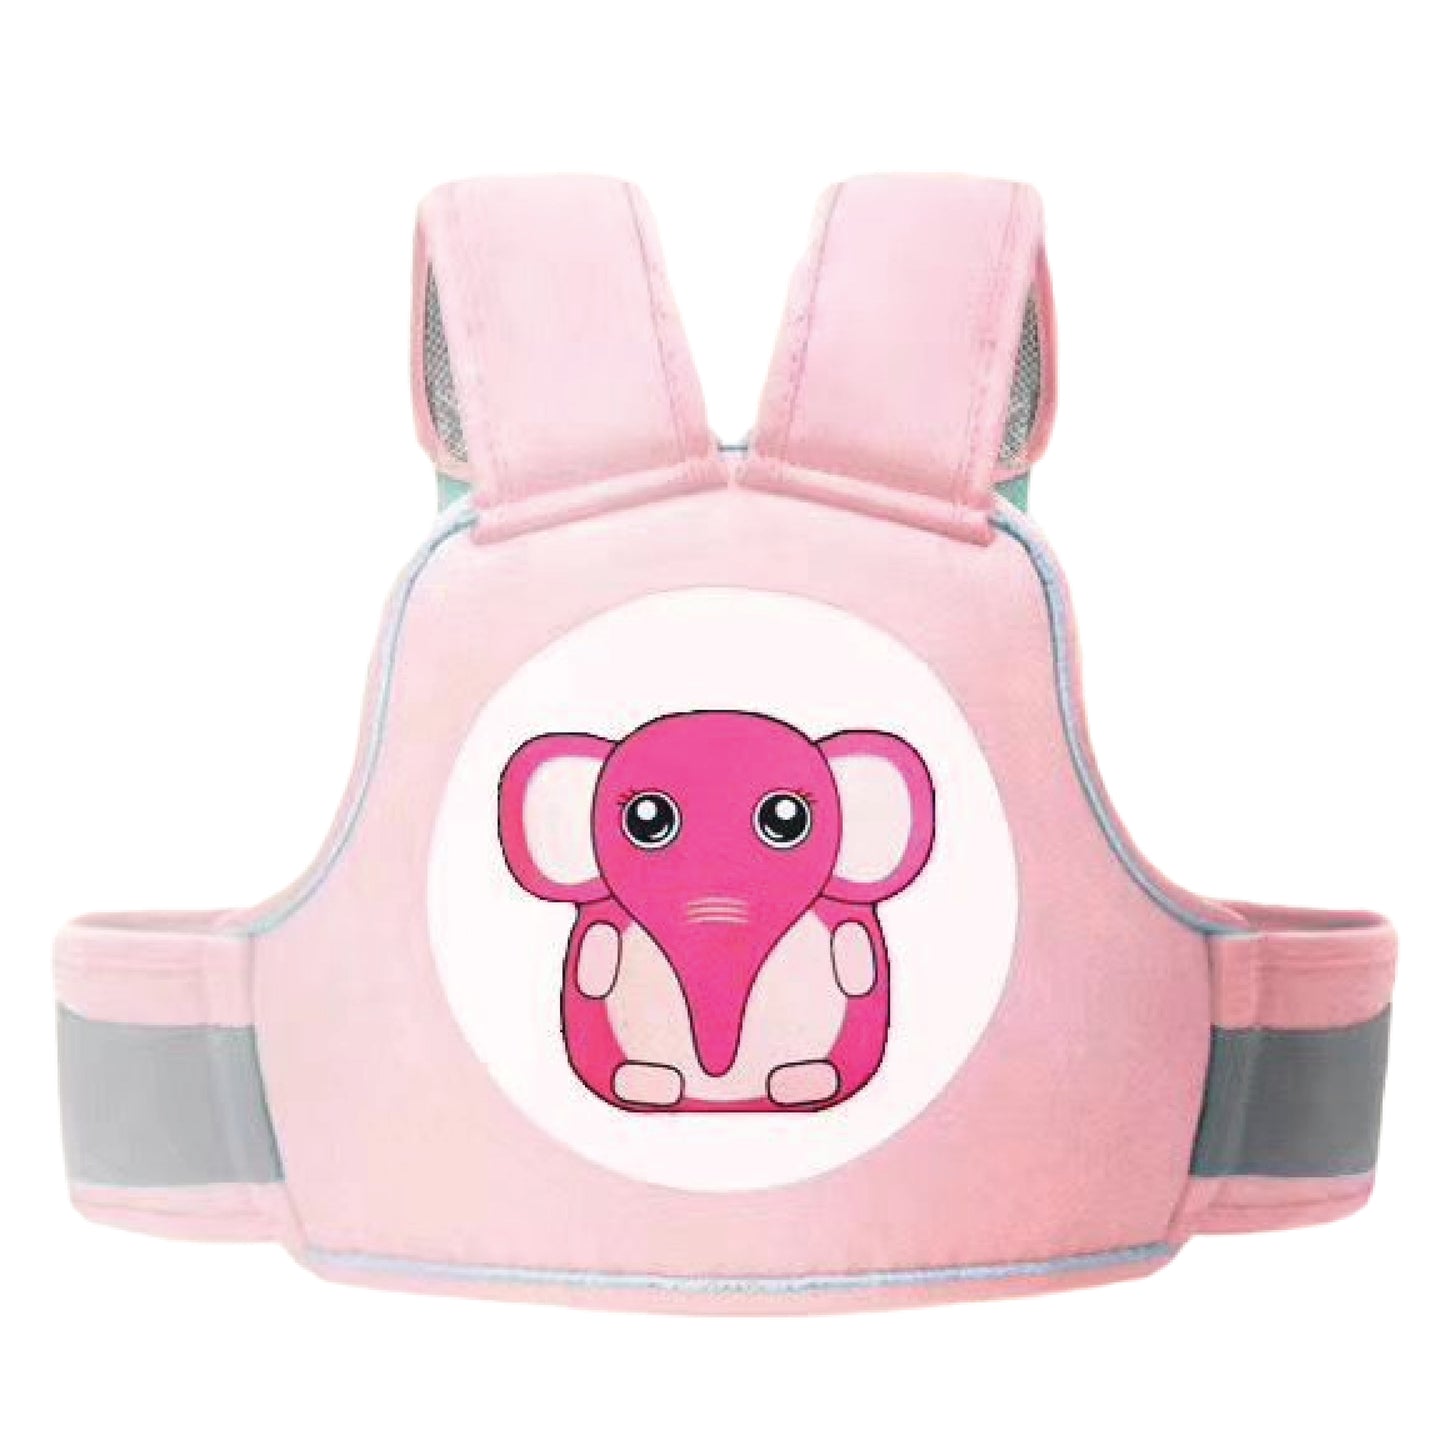 Baby Safety Travel Belt, Two Wheeler Baby Carrier for Kids Age 18M- 4 Years Pink Color (Elephant)